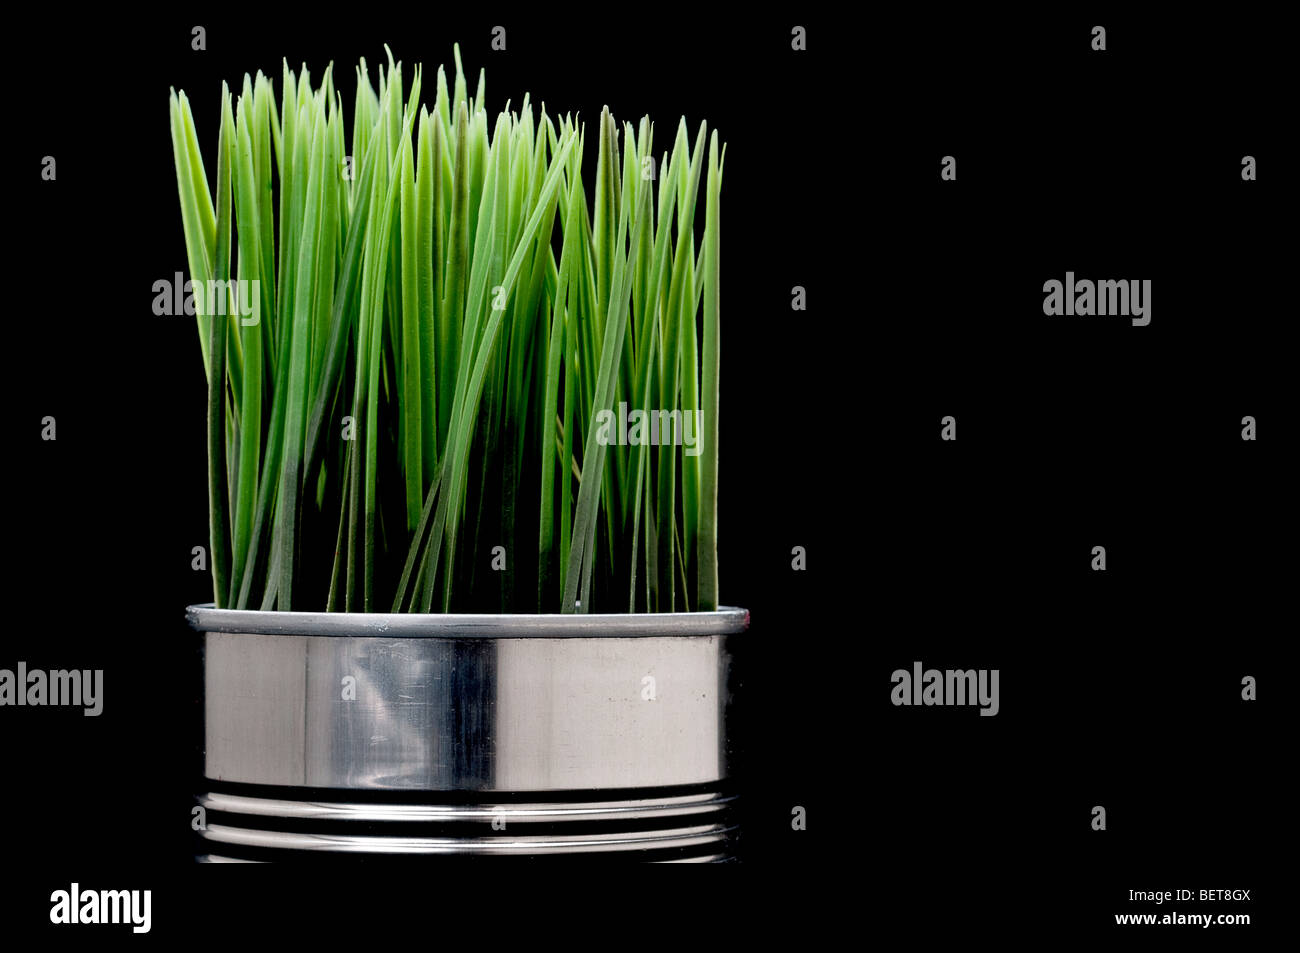 Green grass growing from a recycled aluminum can Stock Photo